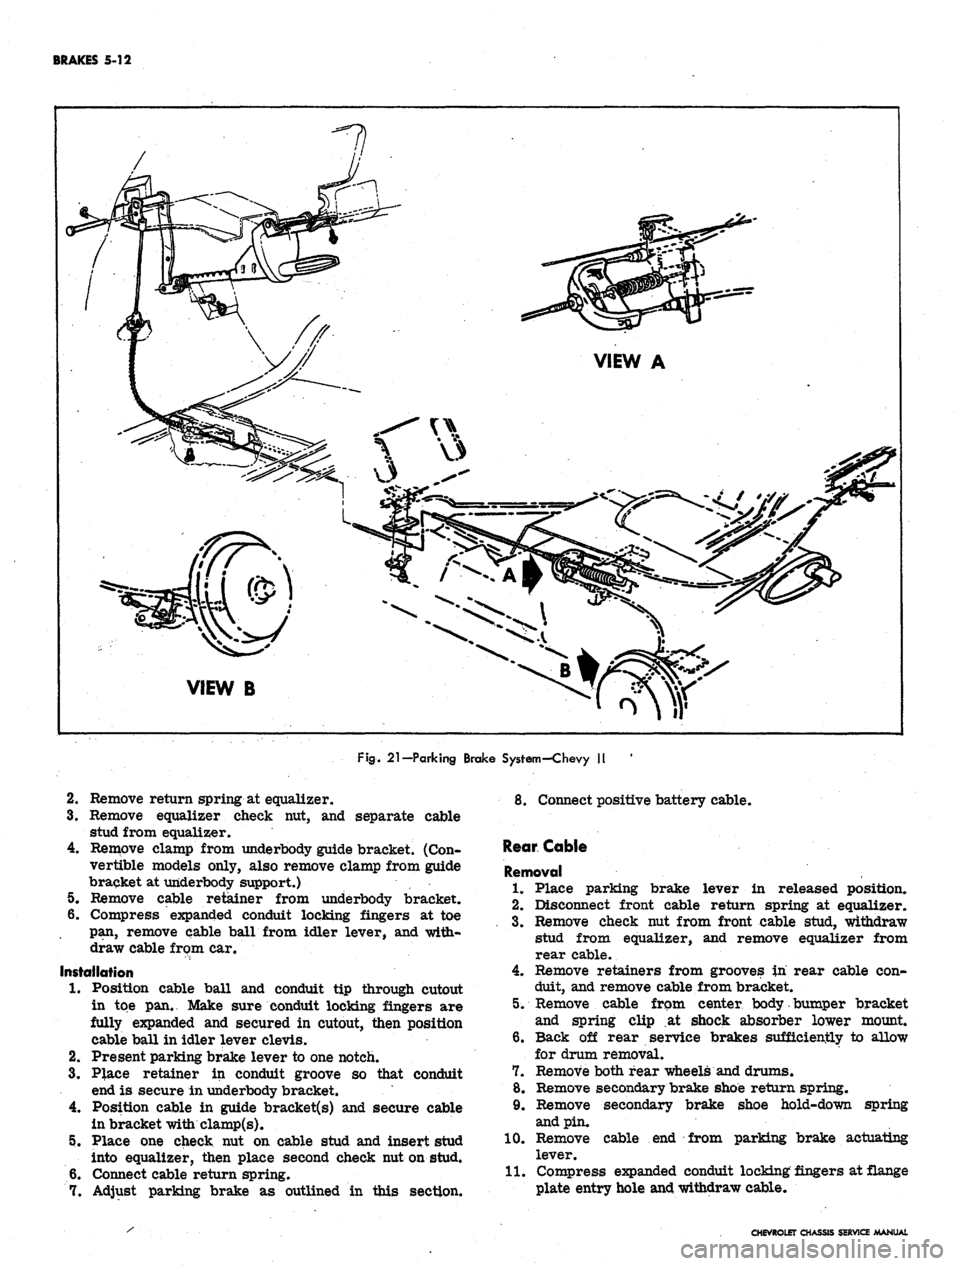 CHEVROLET CAMARO 1967 1.G Chassis Service Manual 
BRAKES 5-12

VIEW B

Fig.
 21—Parking Brake System-Chevy II

2.
 Remove return spring at equalizer.

3.
 Remove equalizer check nut, and separate cable

stud from equalizer.

4.
 Remove clamp from 